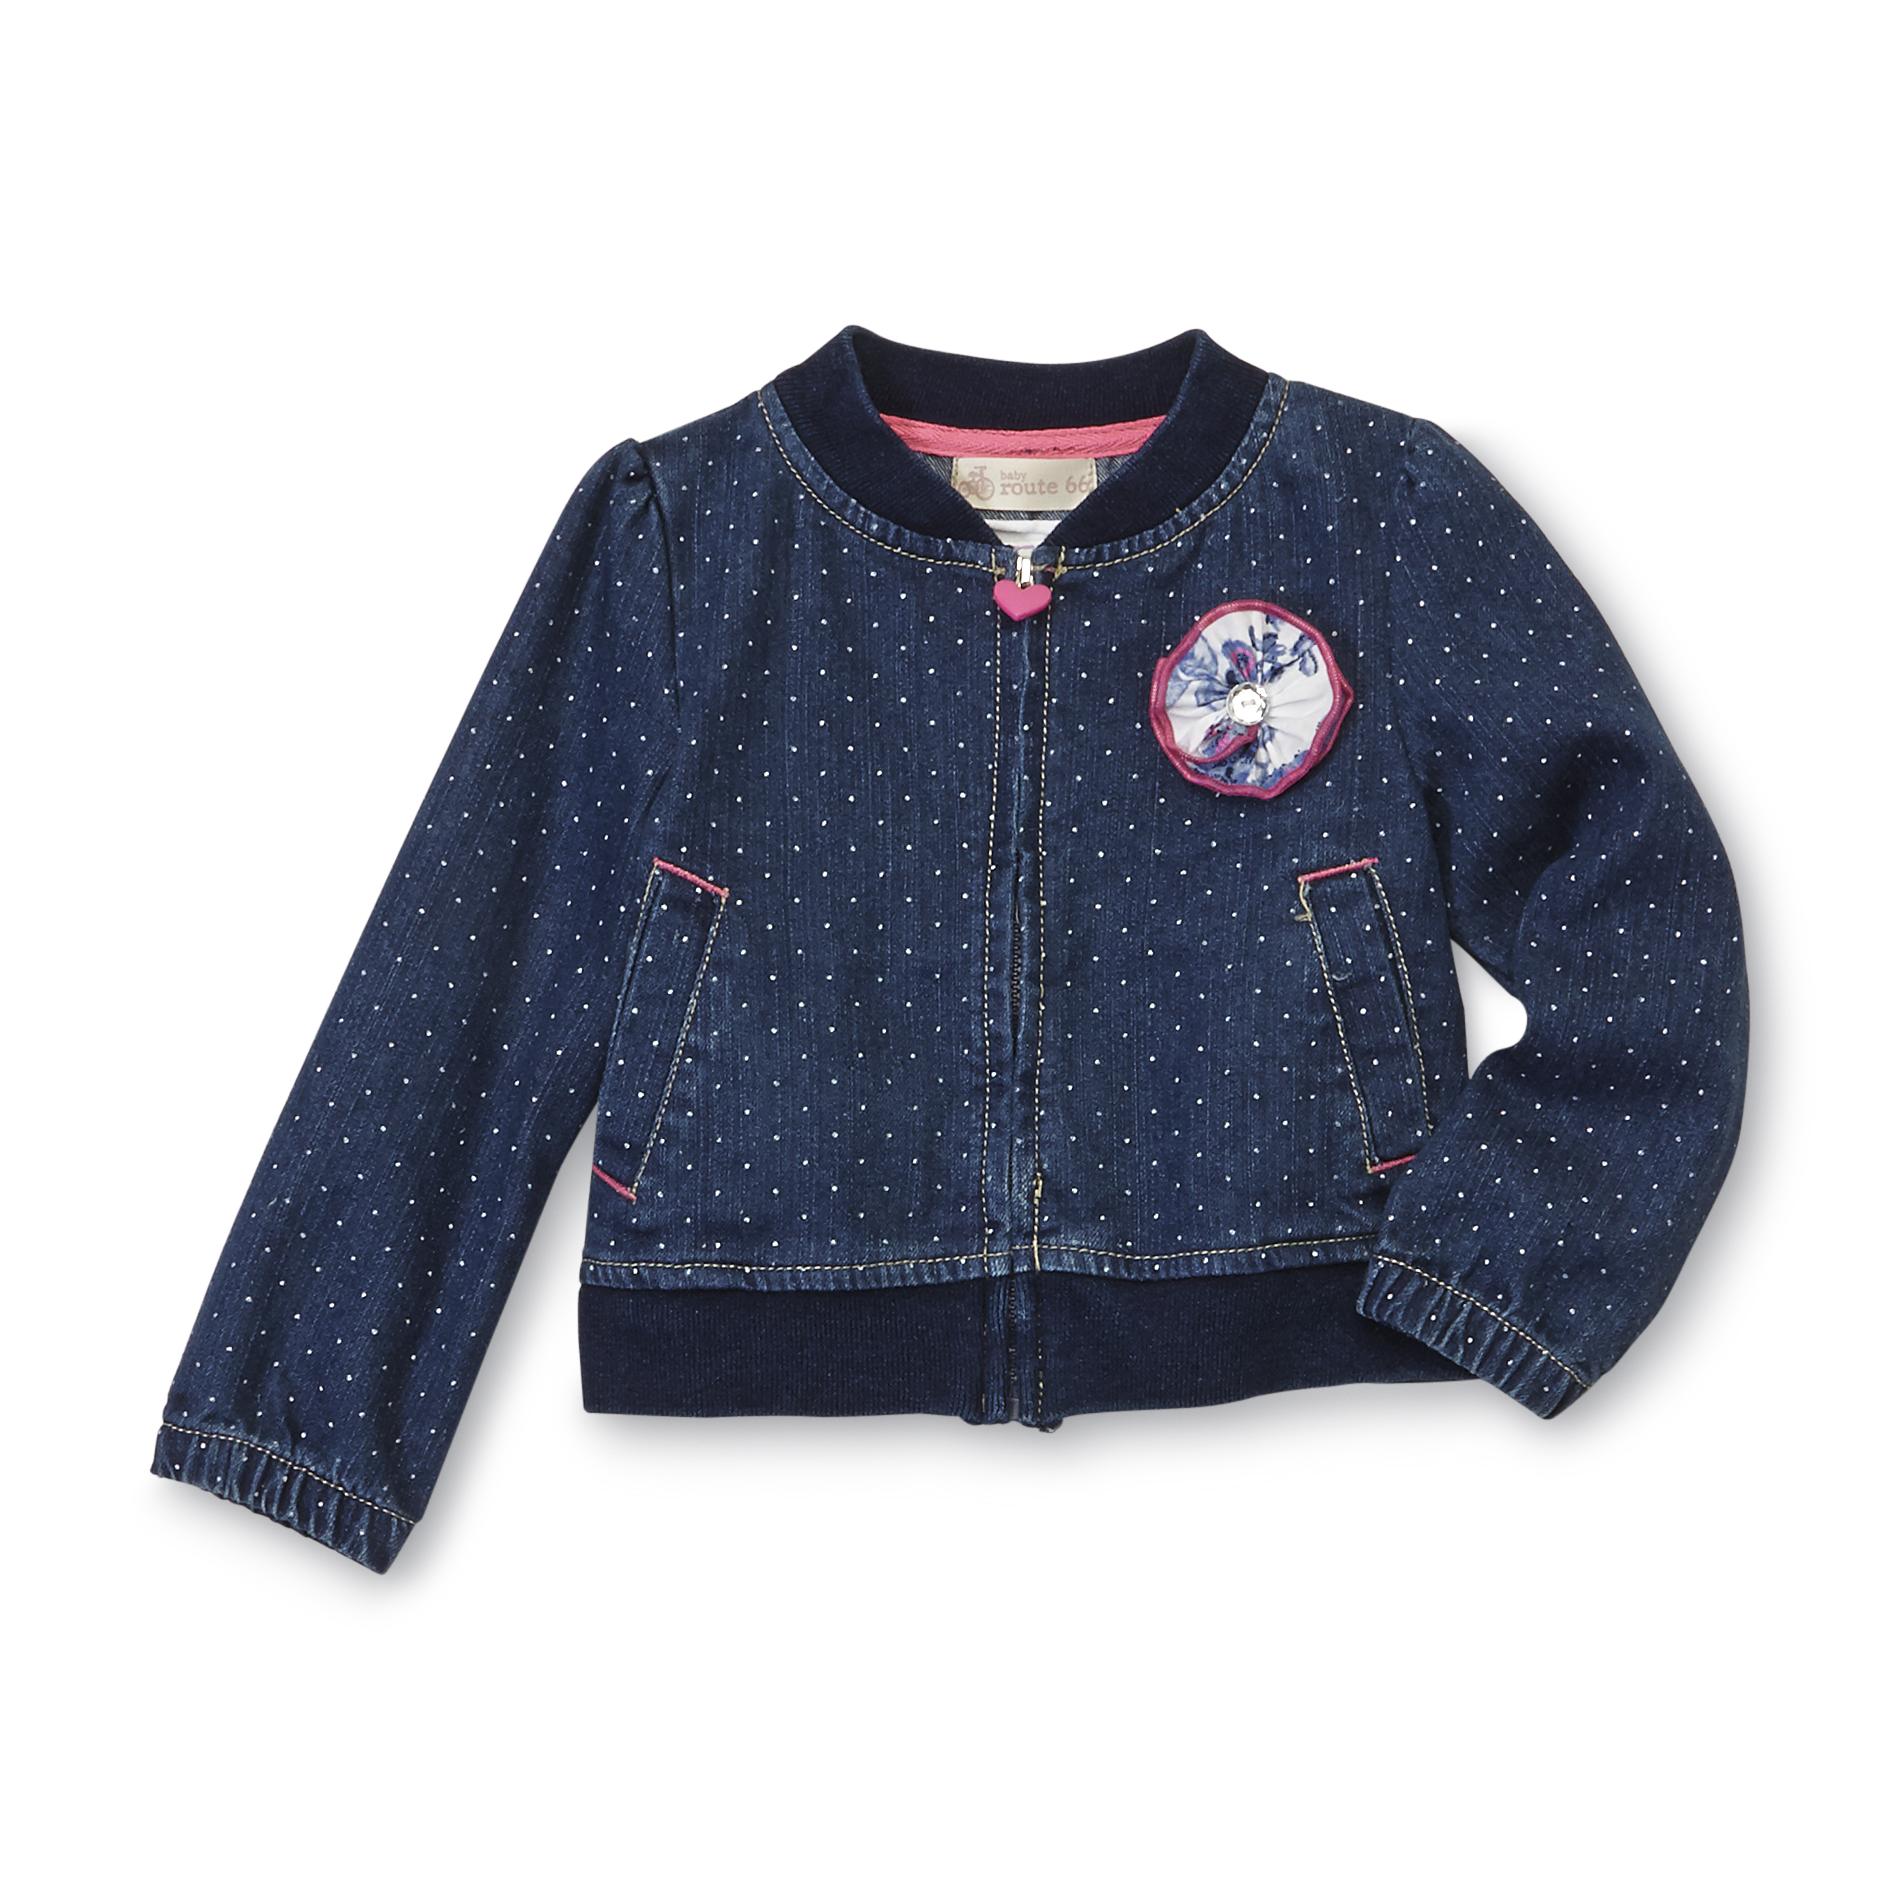 Route 66 Baby Infant & Toddler Girl's Chambray Jacket - Dots